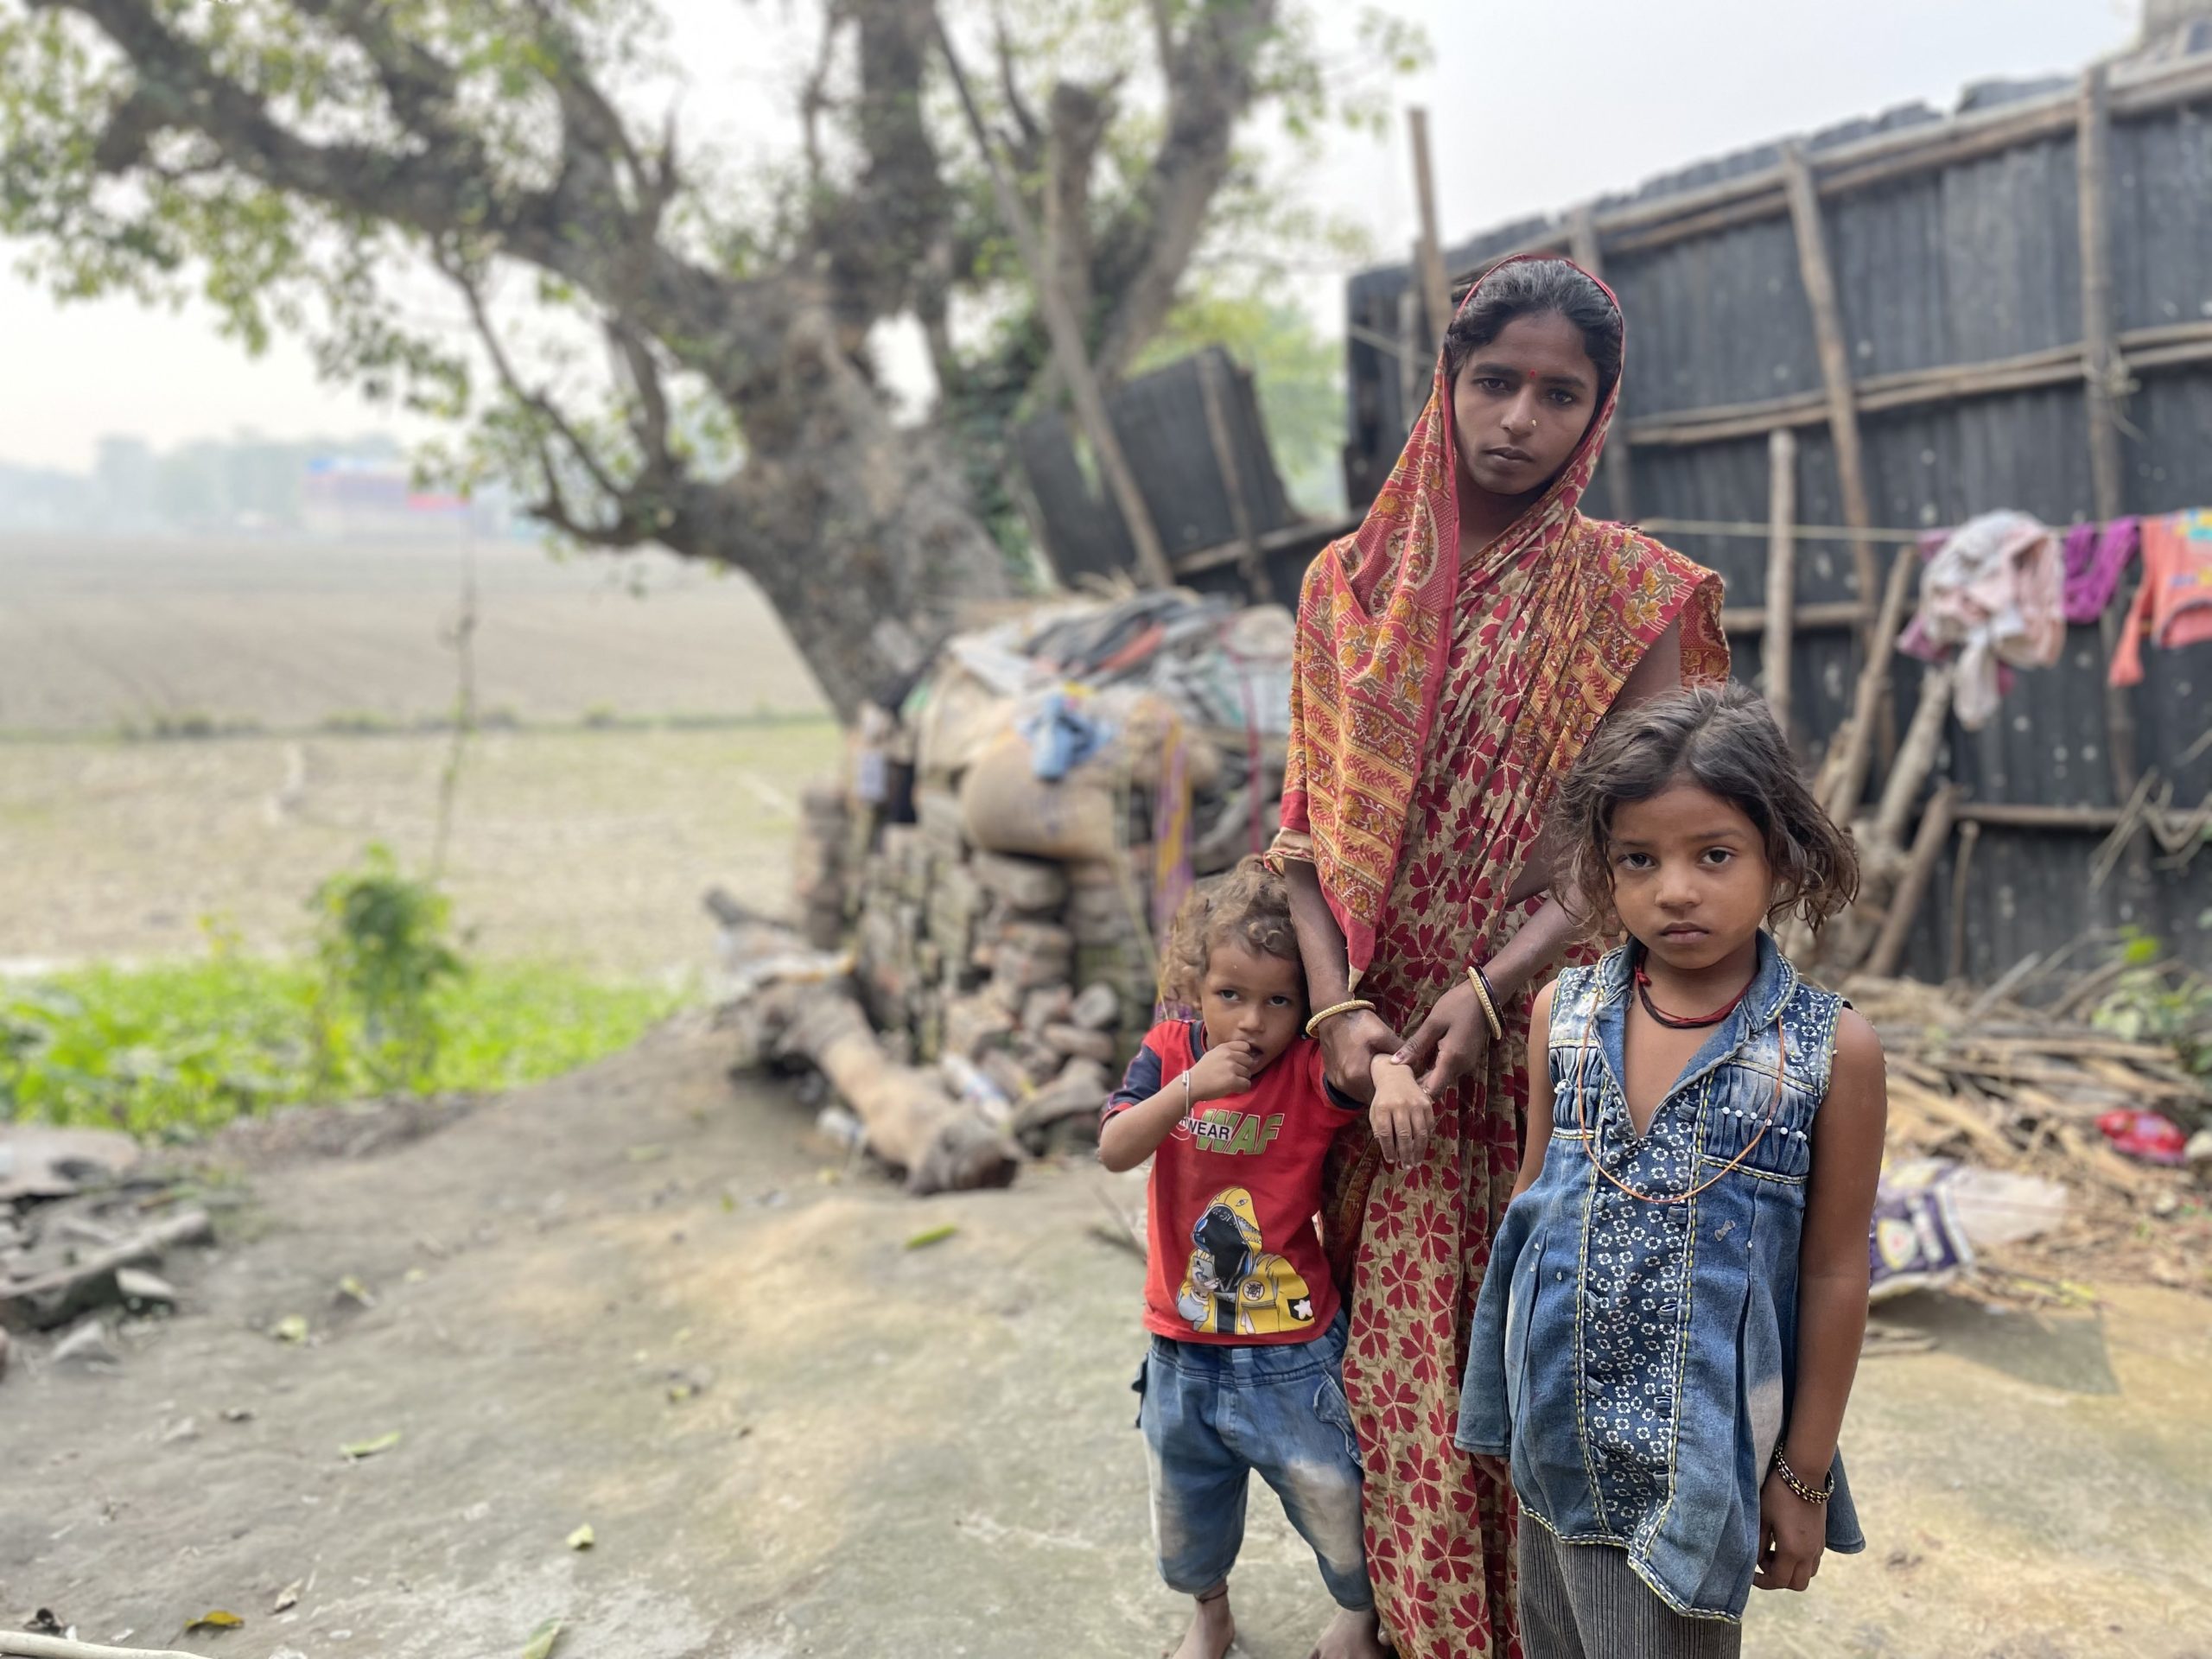 Ravina Devi, whose husband died in the 2020 floods, stands behind her two daughters